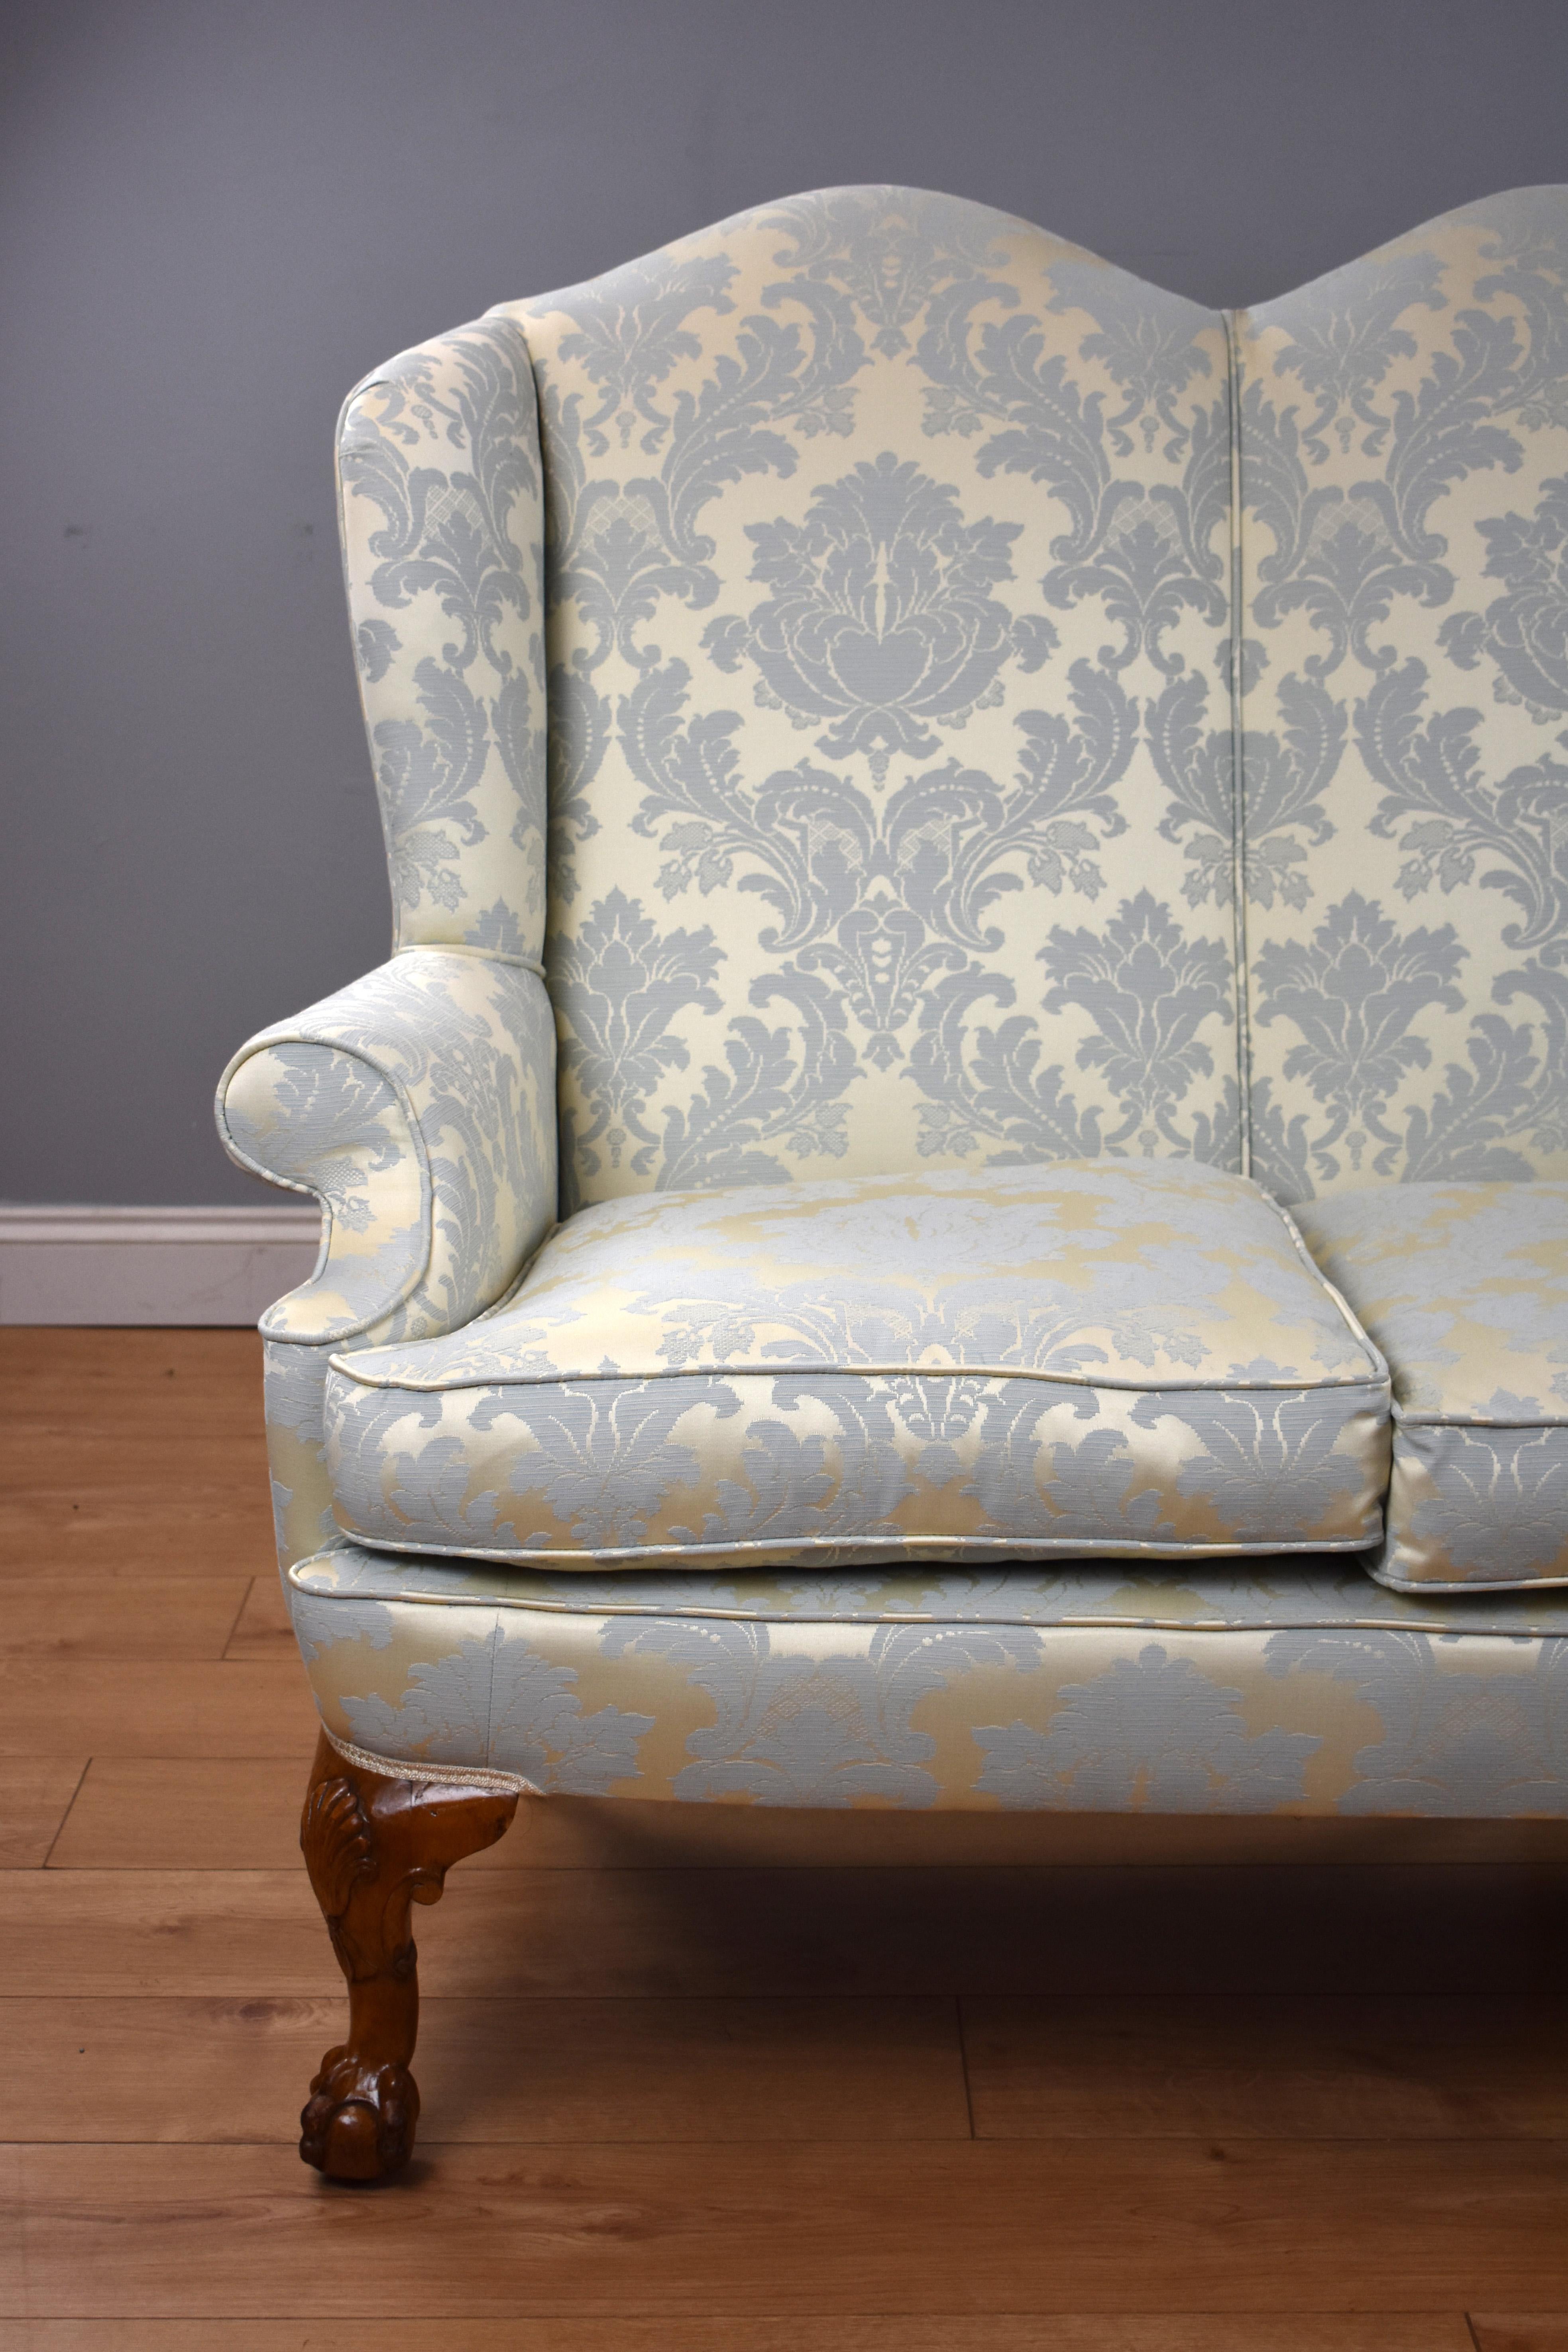 For sale is an antique Queen Anne style three-seat sofa, having arched backs, with scroll arms, standing on elegant carved cabriole legs, the sofa remains in very good condition. The settee is upholstered with a medallion pattern in damask.